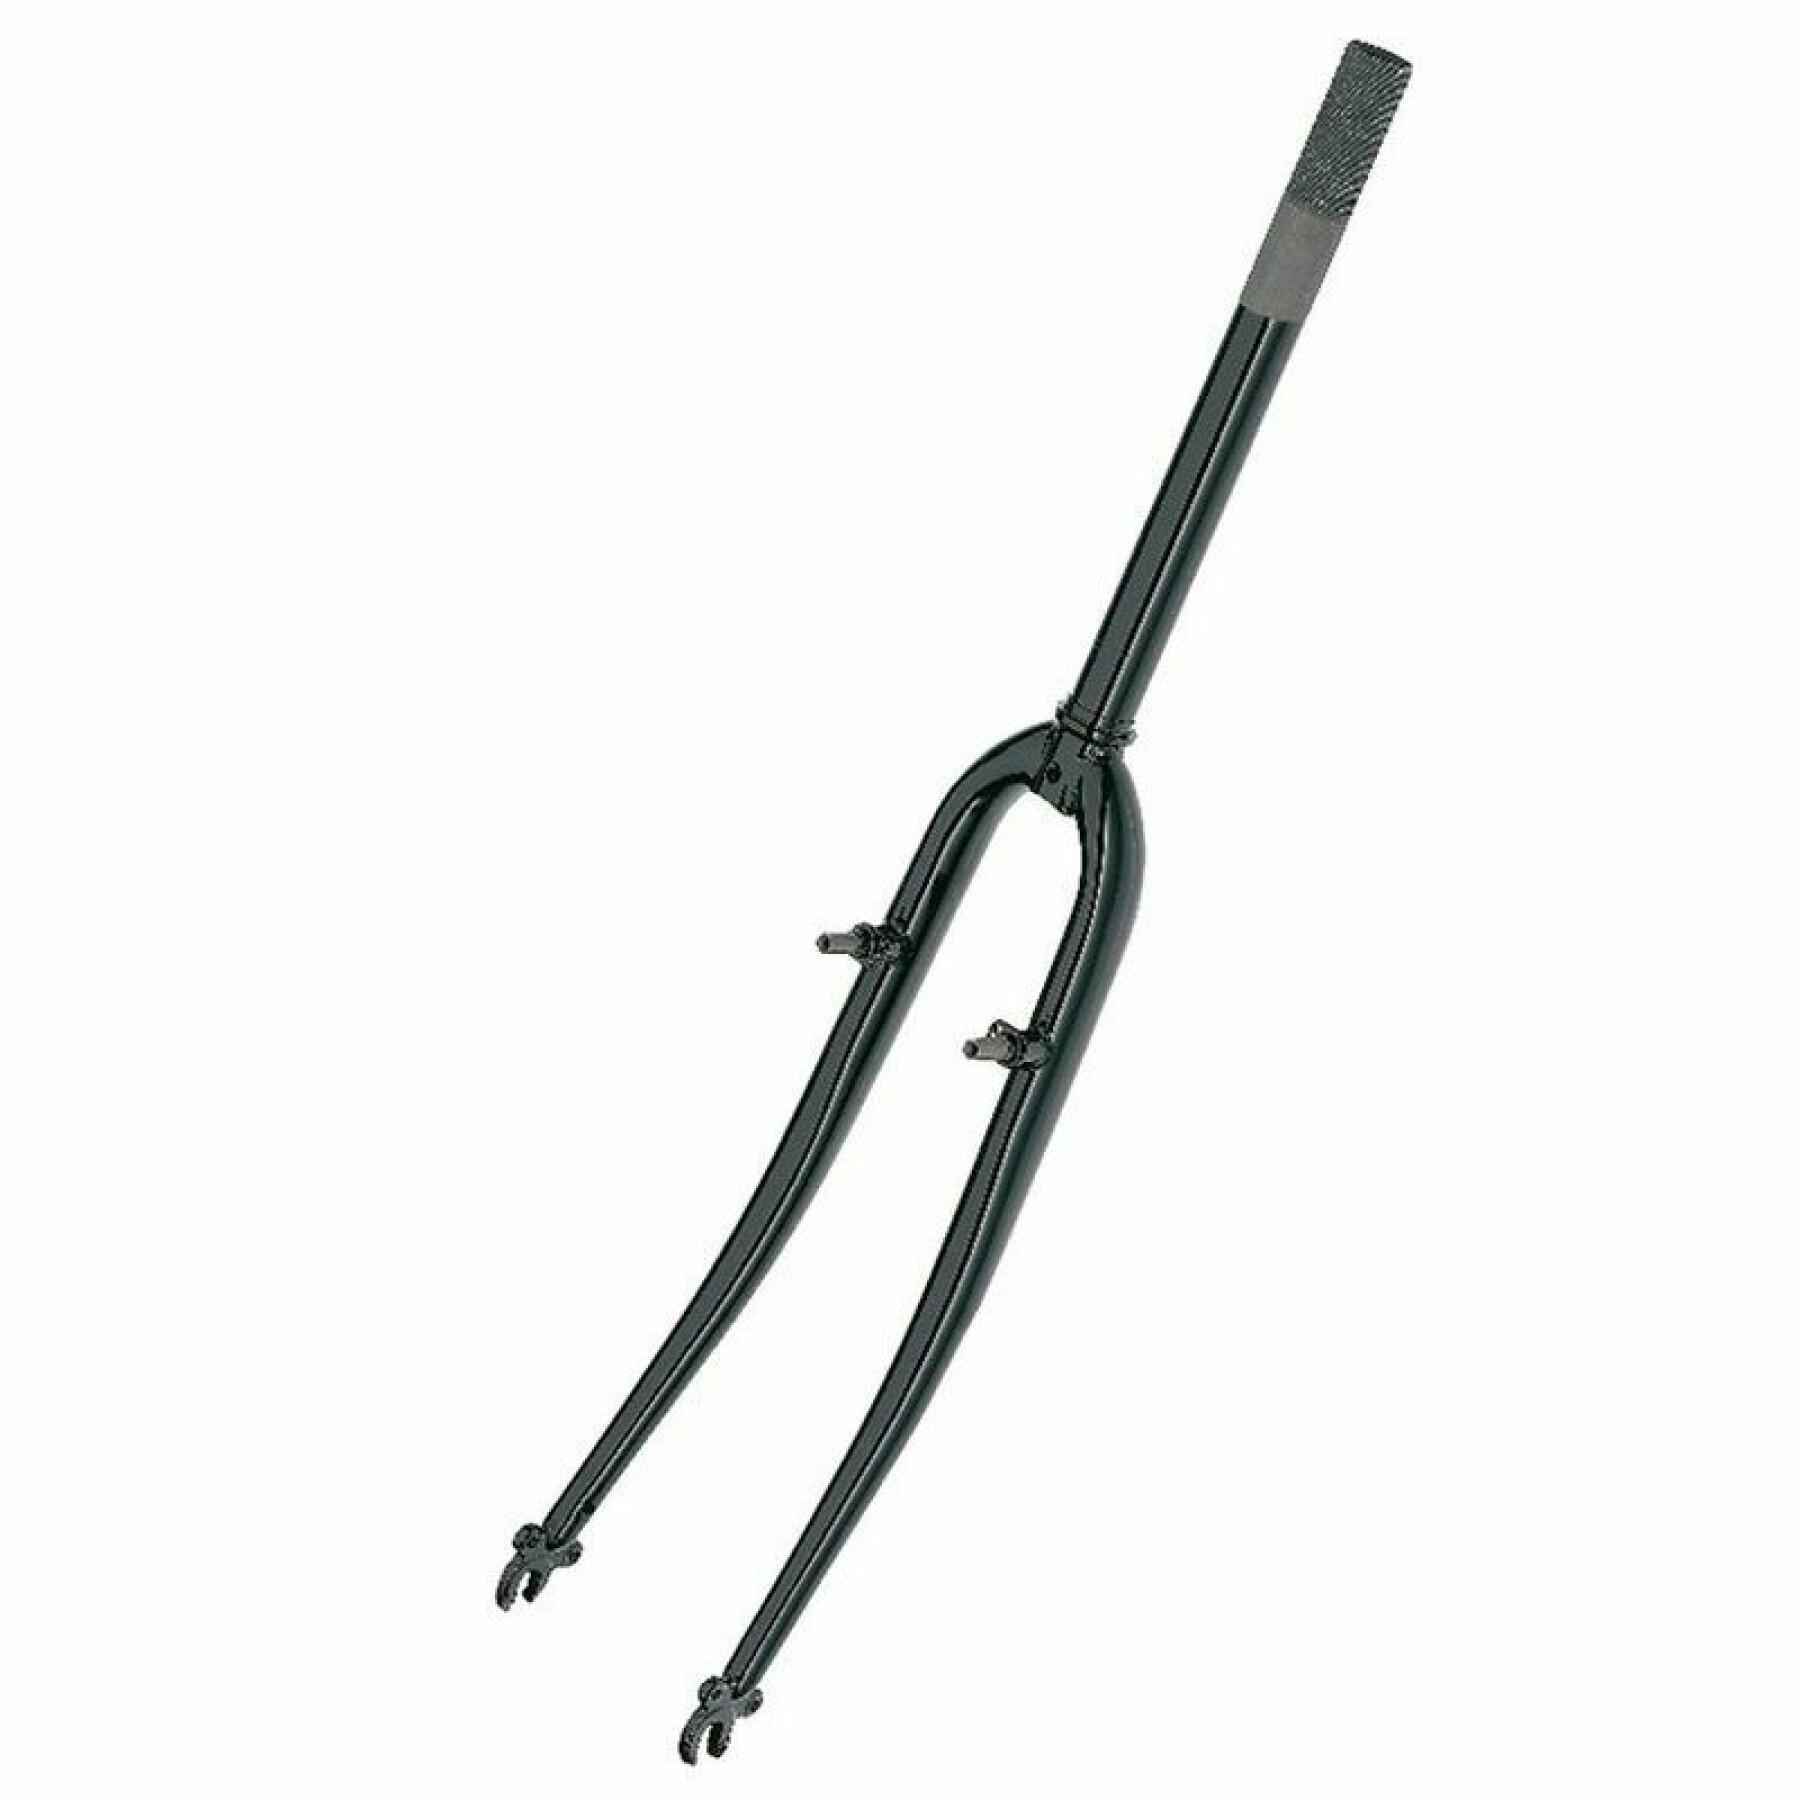 Forcella Point unicrown vtt 26" 1 1/8"